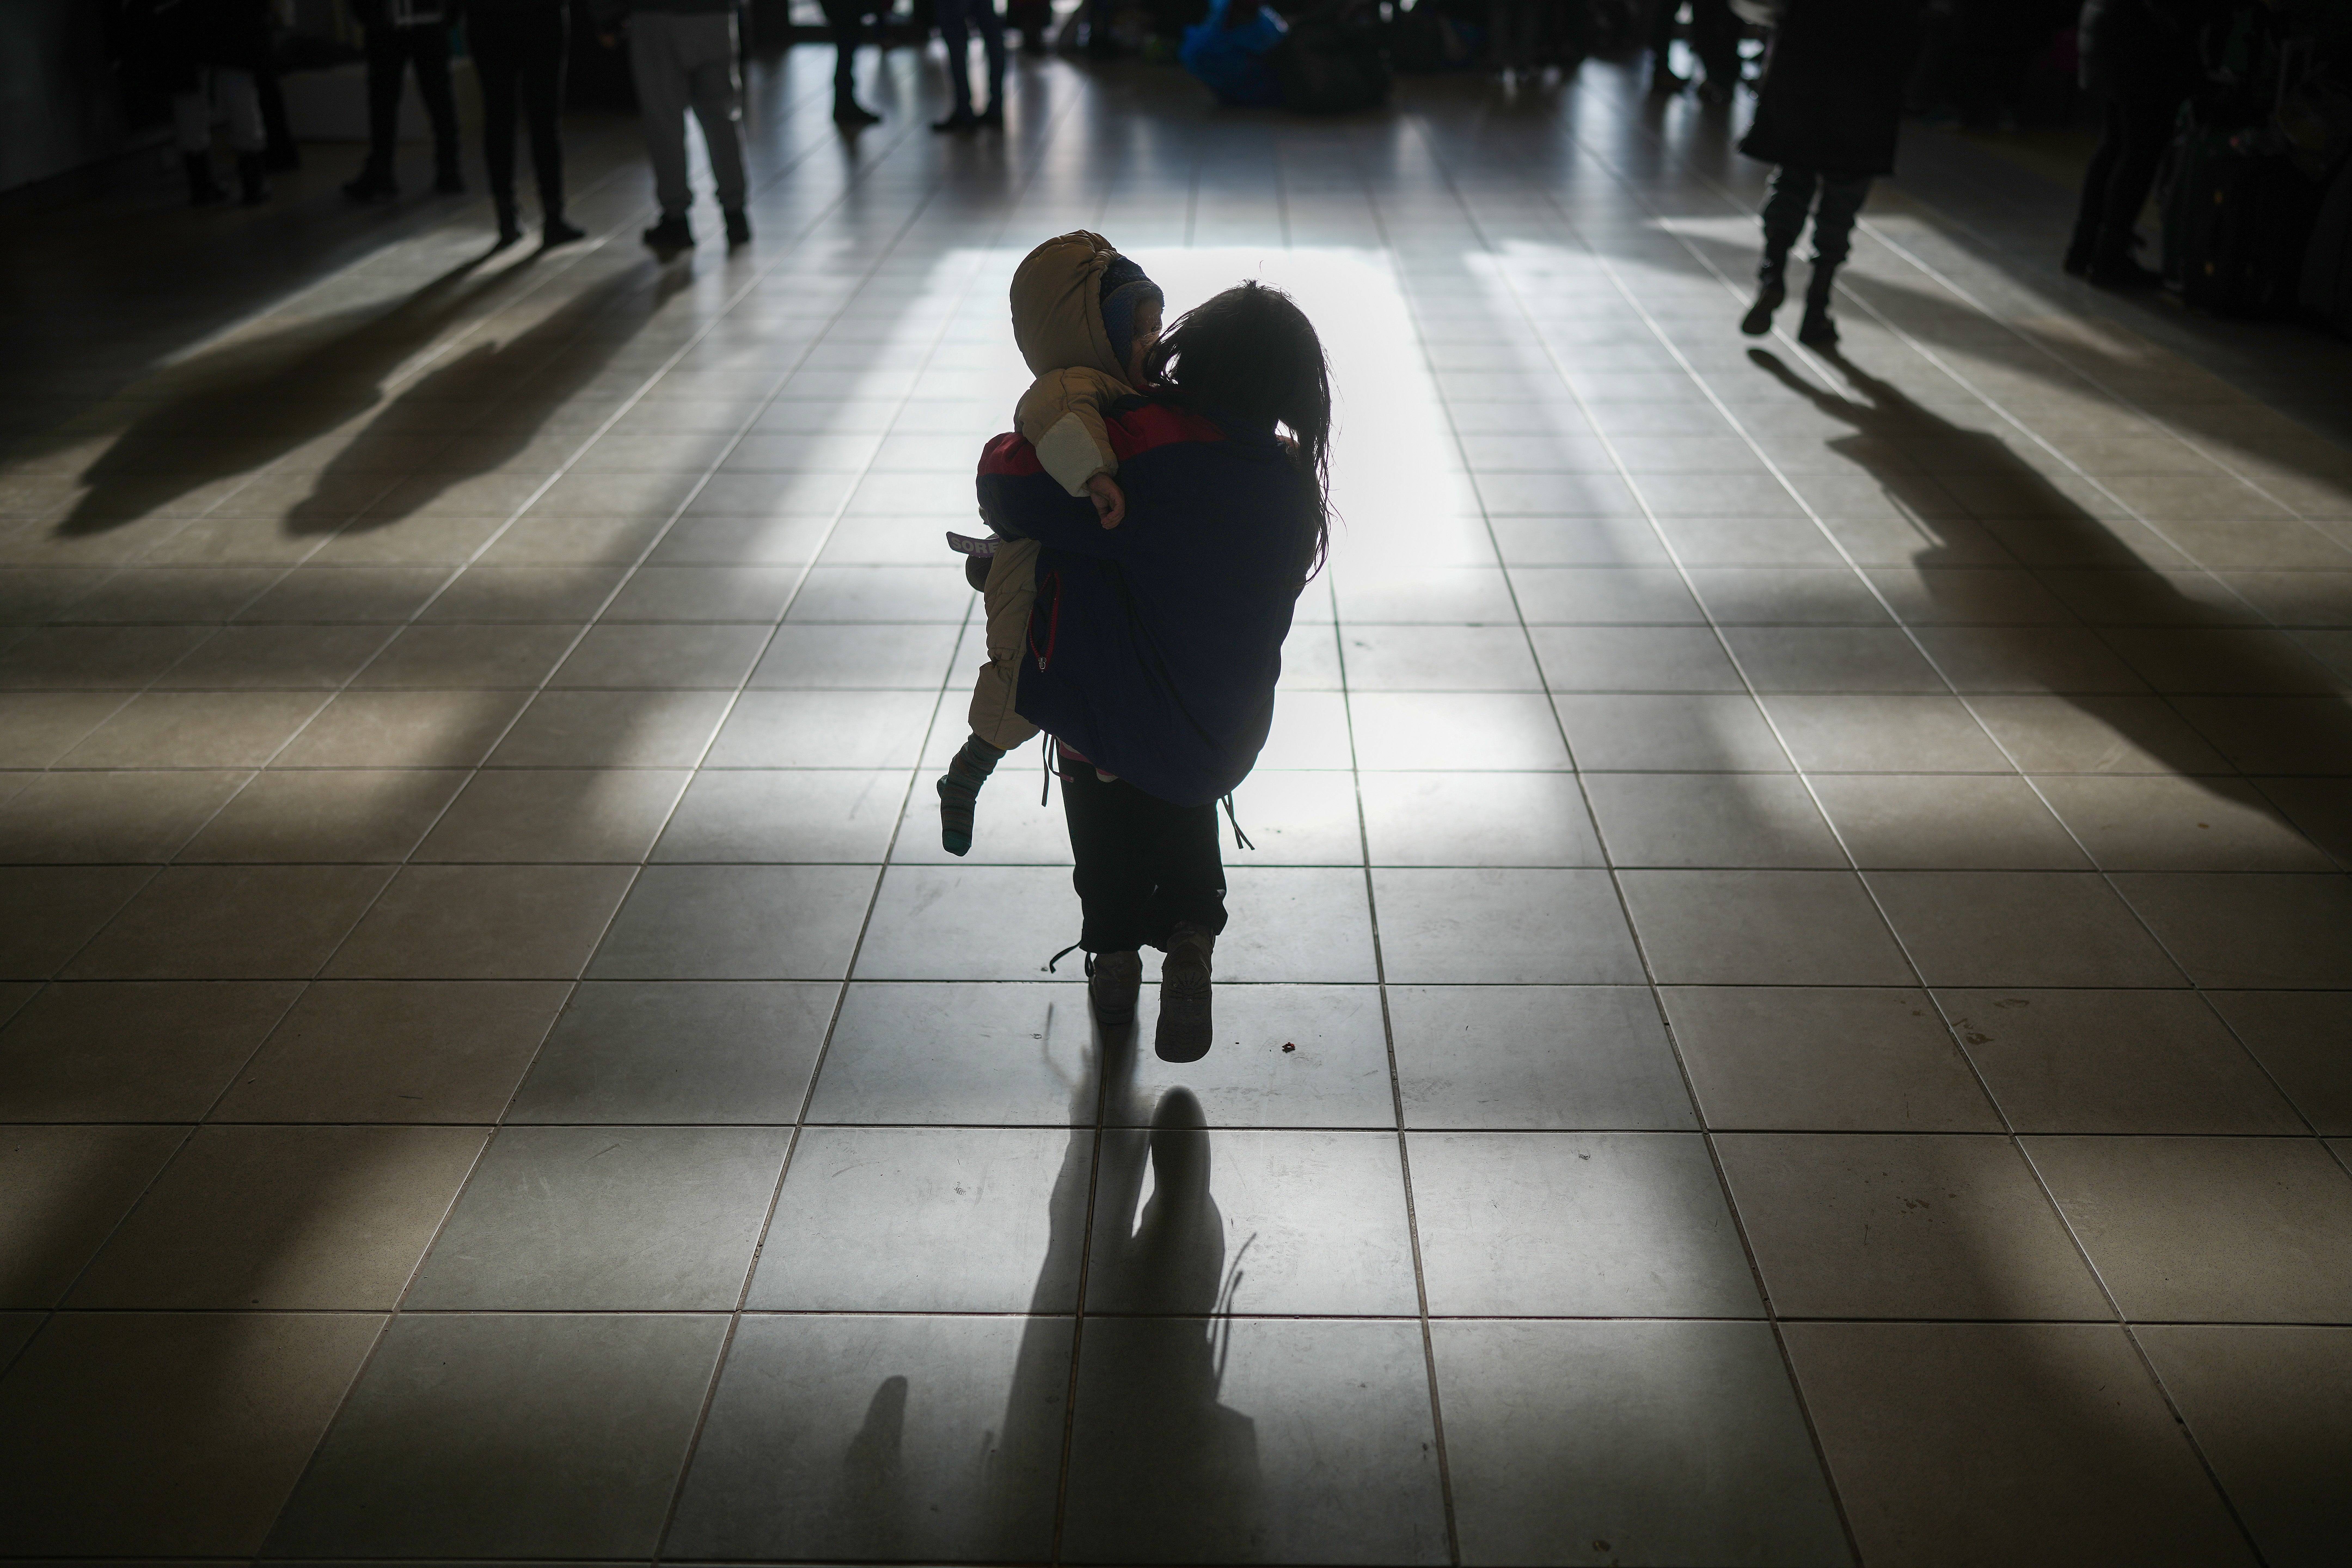 File photo: a Ukrainian refugee girl carries a sibling after arriving by train at the Hungarian border town of Zahony in early March